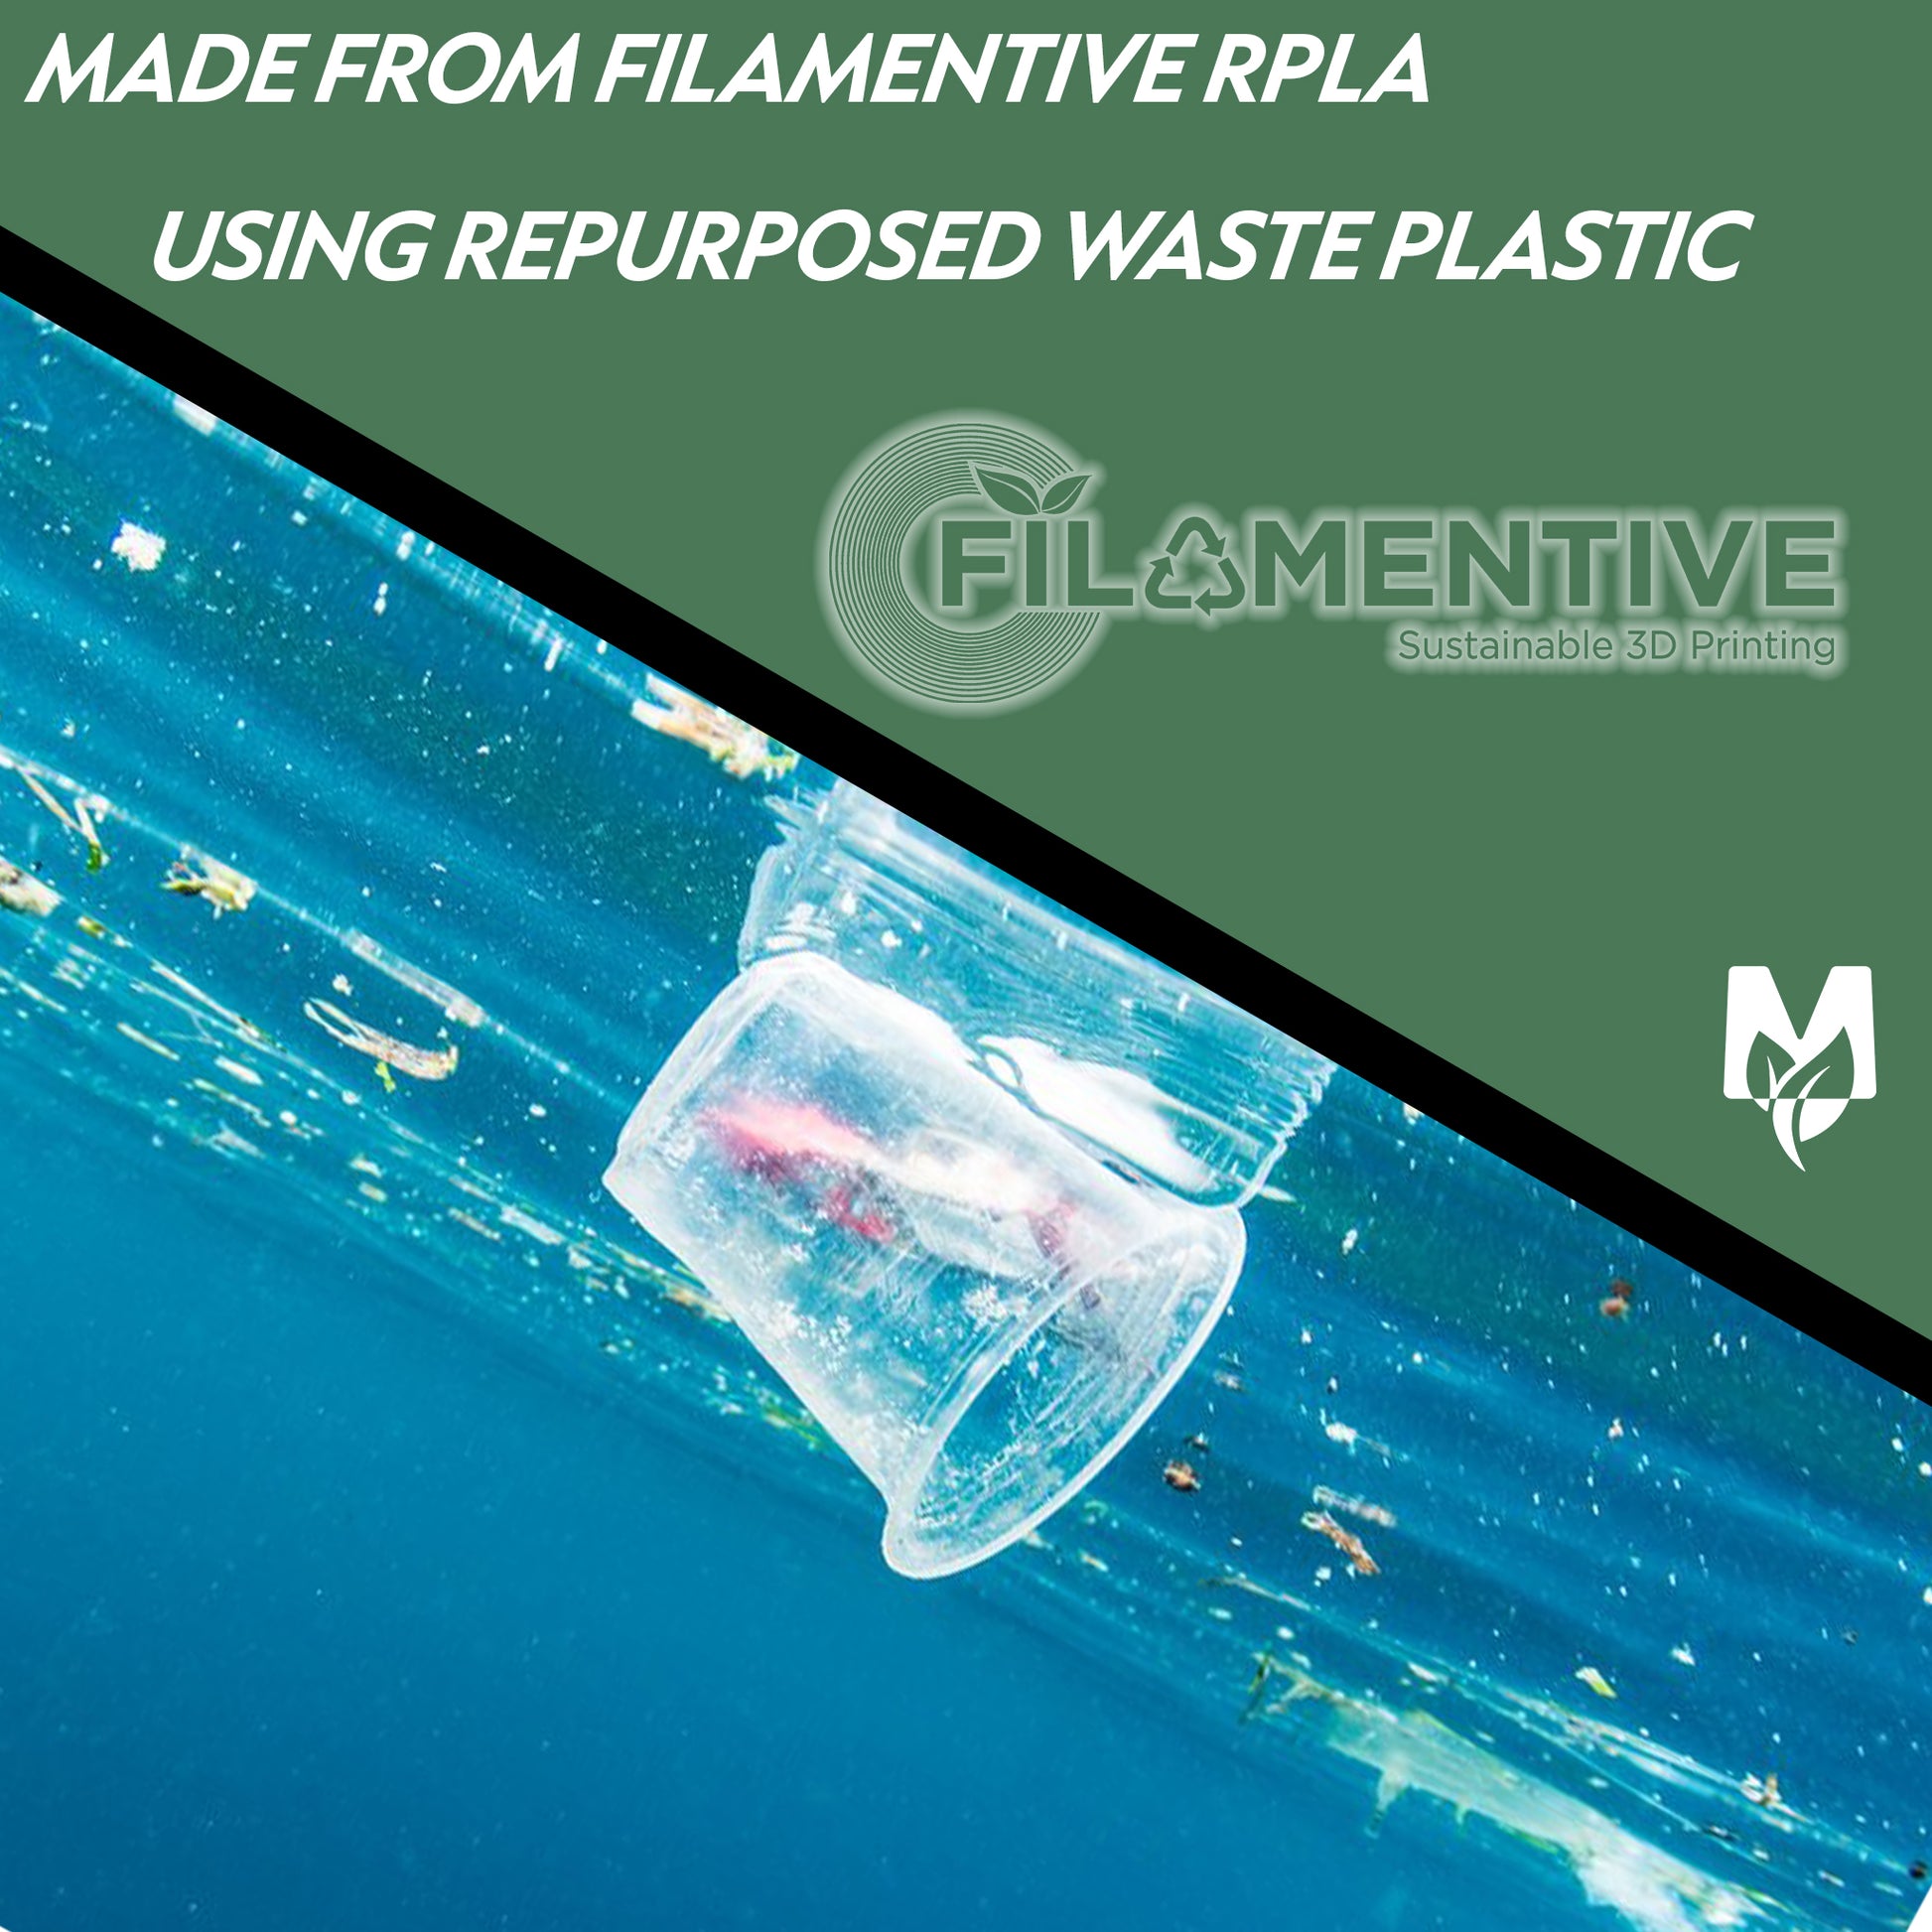 Motoreco 3D printed products using filamentive rpla made from repurposed waste